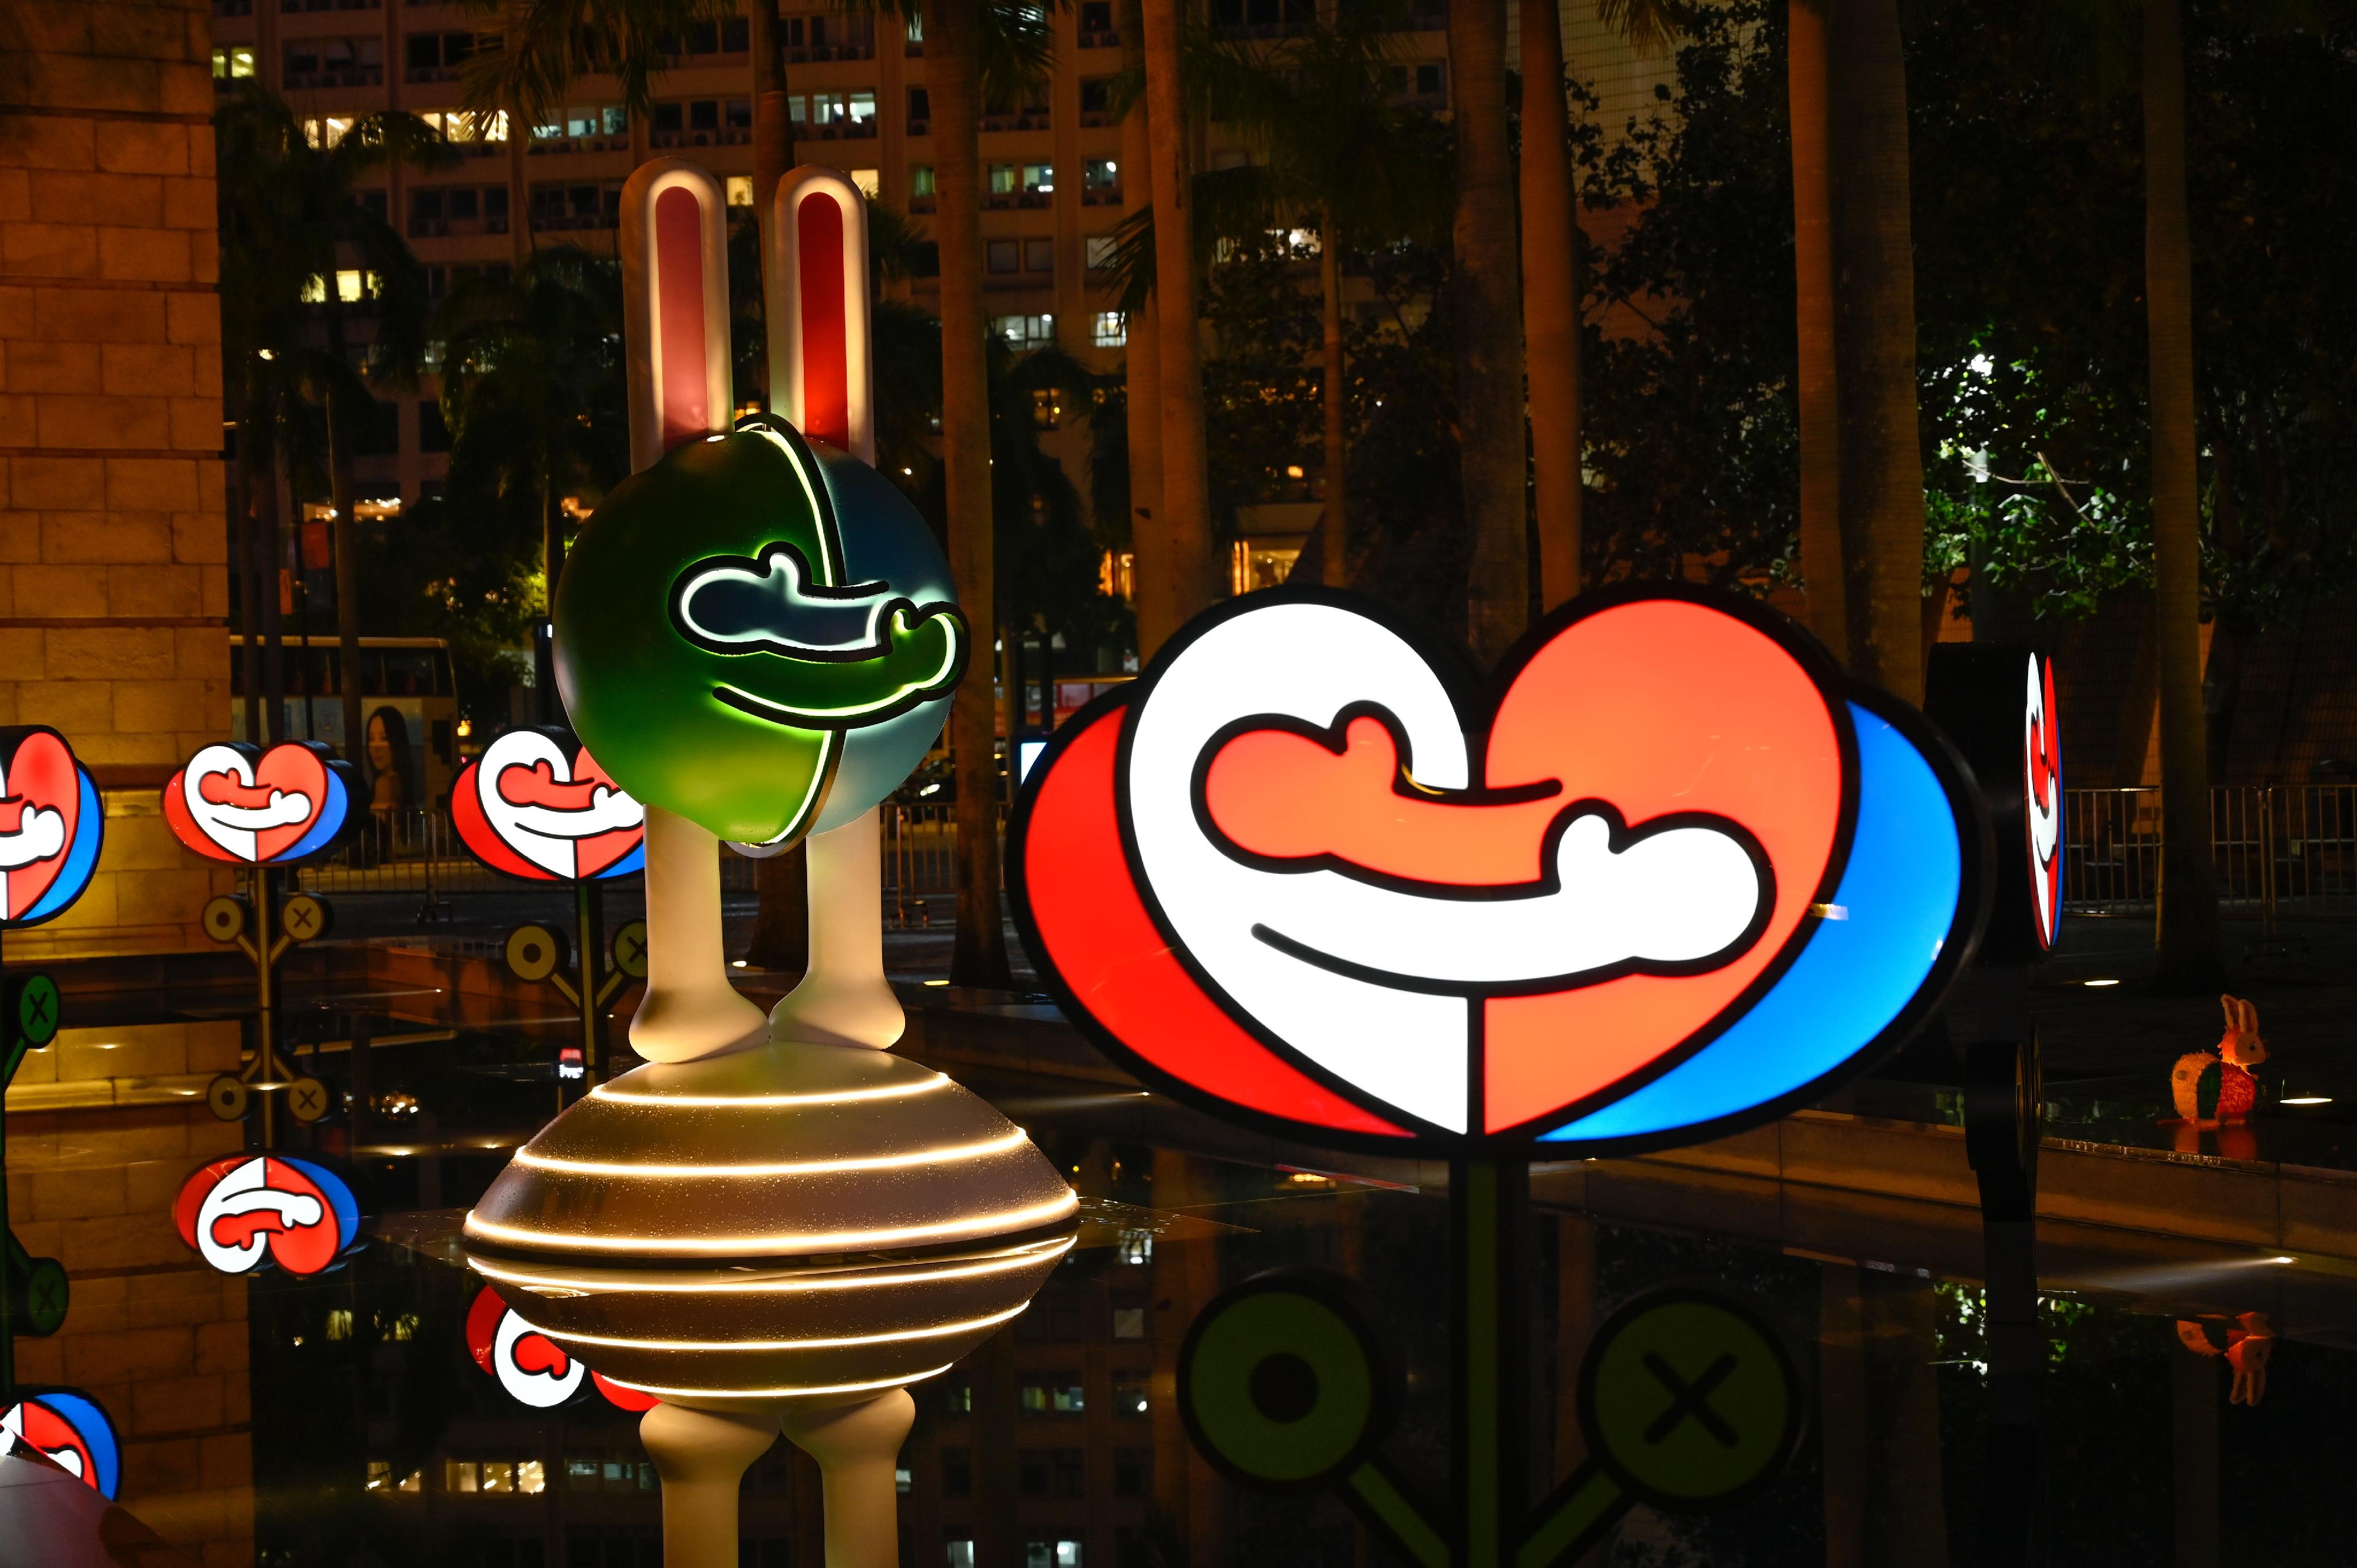 The Leisure and Cultural Services Department will hold the 2022 Mid-Autumn Lantern Displays from September 7 to 12 to enhance the festive atmosphere and celebrate the 25th anniversary of the establishment of the Hong Kong Special Administrative Region. Photo shows the lighting installation named "Hugs without Distance", which is now being displayed at the Hong Kong Cultural Centre Piazza, will run until September 25.